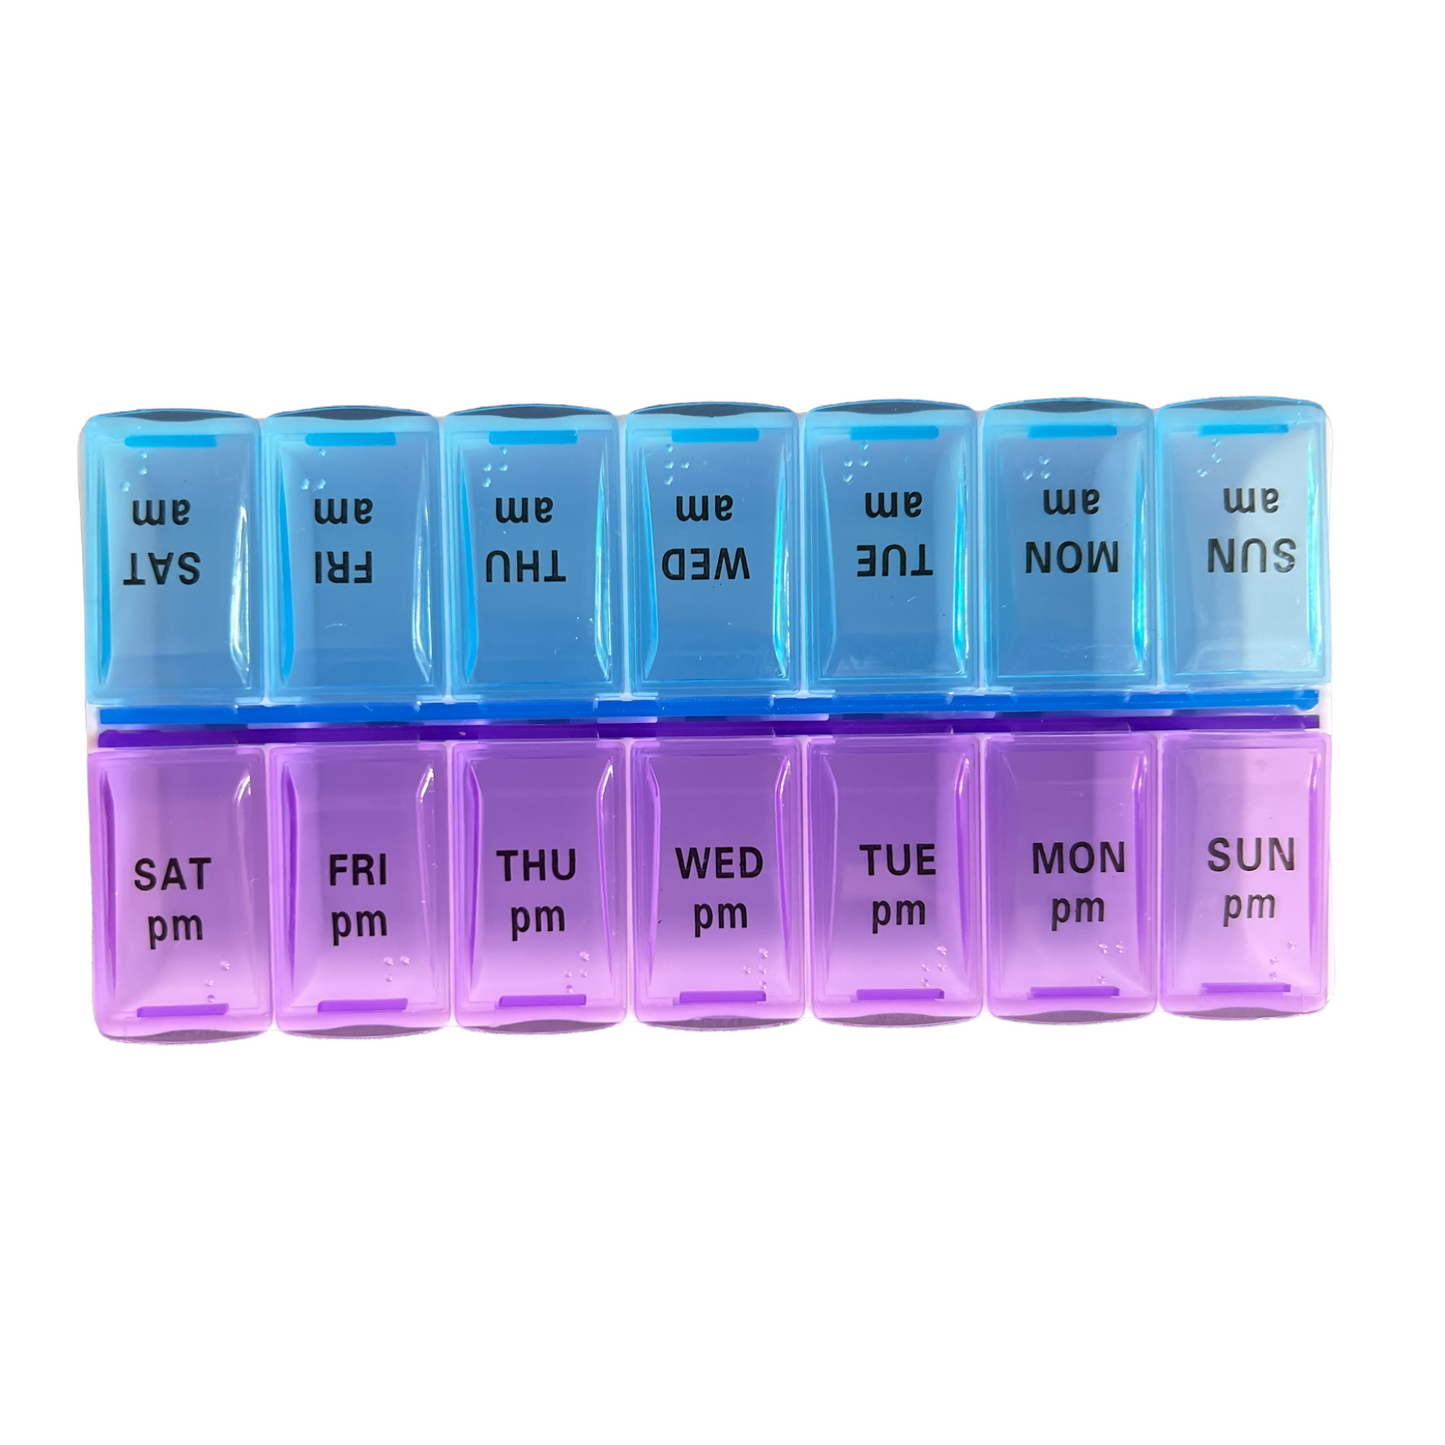 7 Day Pill Box — 2x Blisters Daily - SMALL Managing Medications SPIRIT SPARKPLUGS   